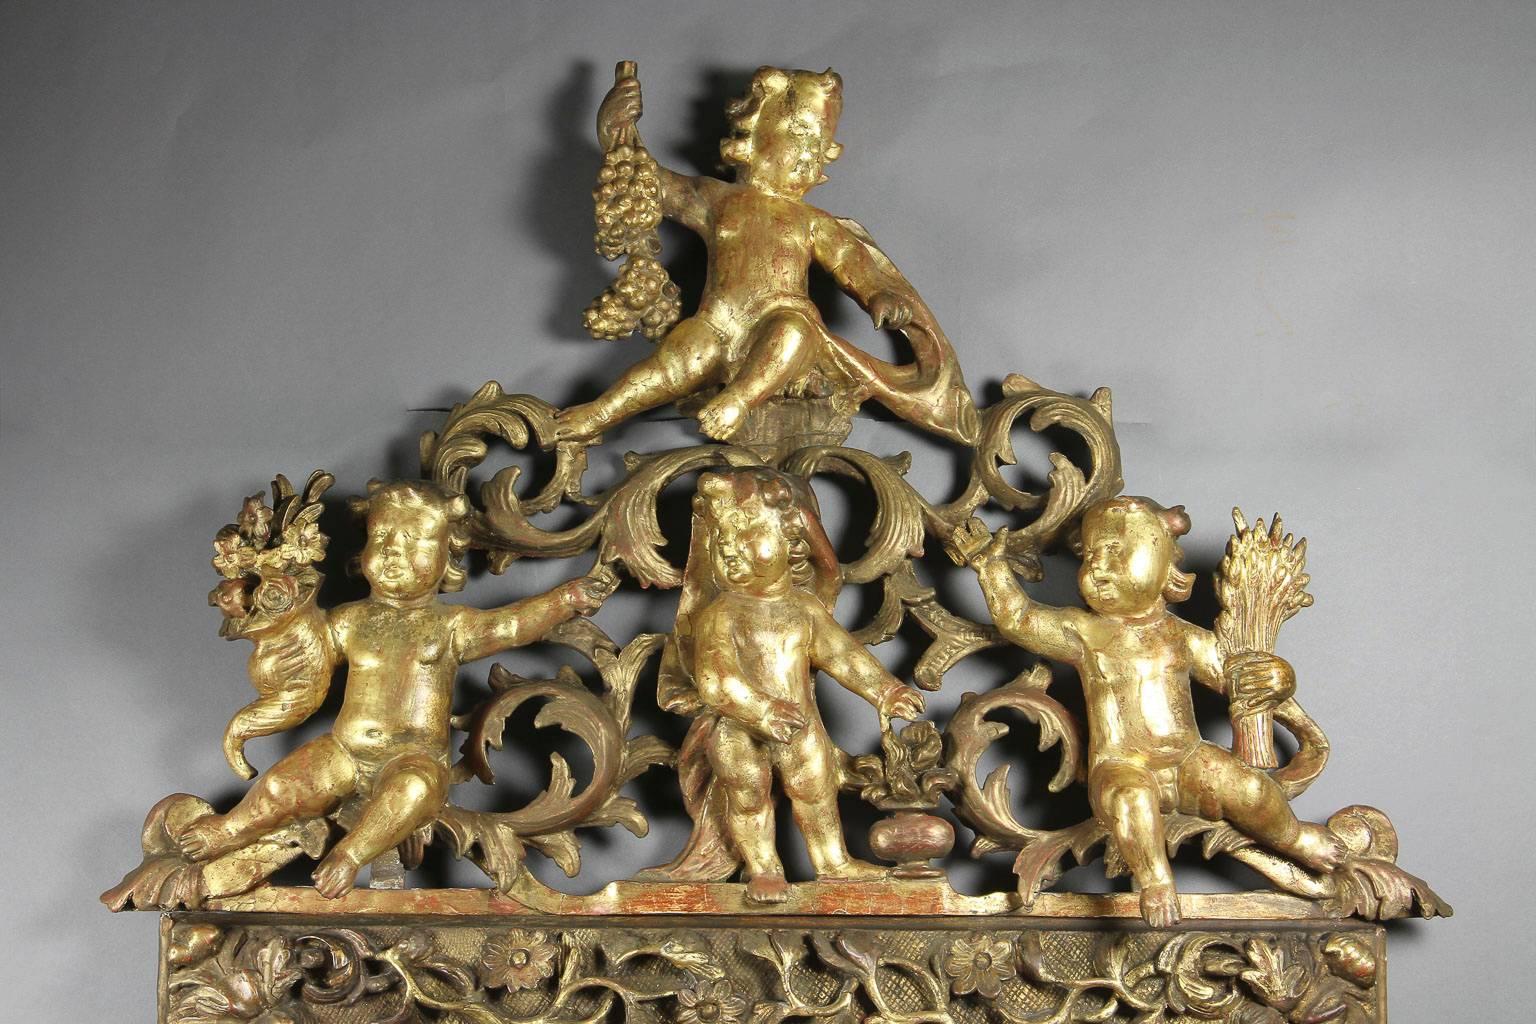 The arched top carved with four figures representing the Four Seasons with their attributes within an acanthus scroll background , the old beveled mirror plate set in a carved cushion form frame carved and decorated with flowers and trailing vine.